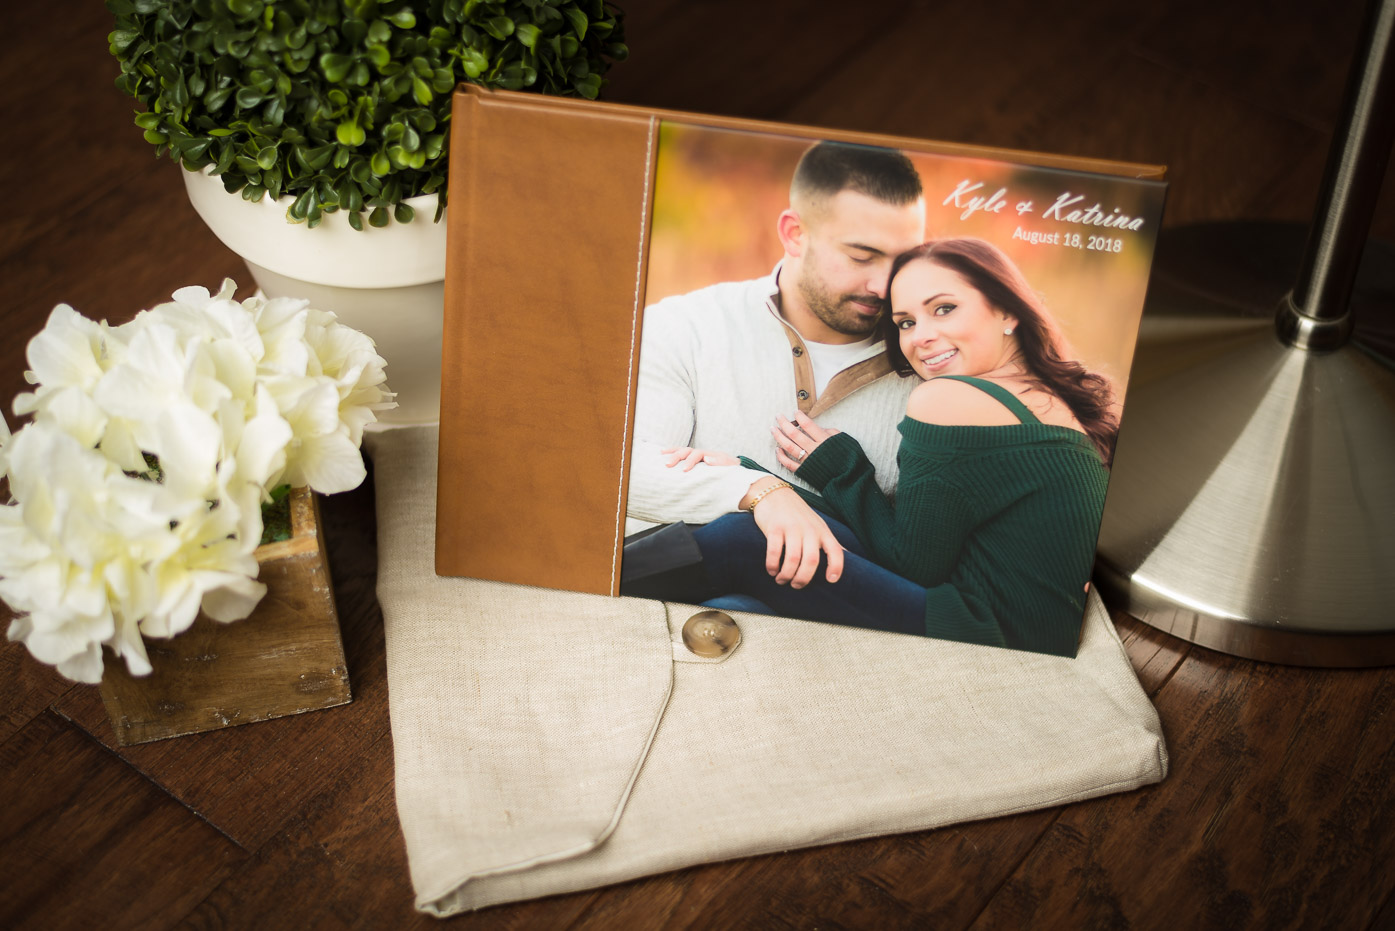 Copy of Guest Sign In Album with Engagement Photos